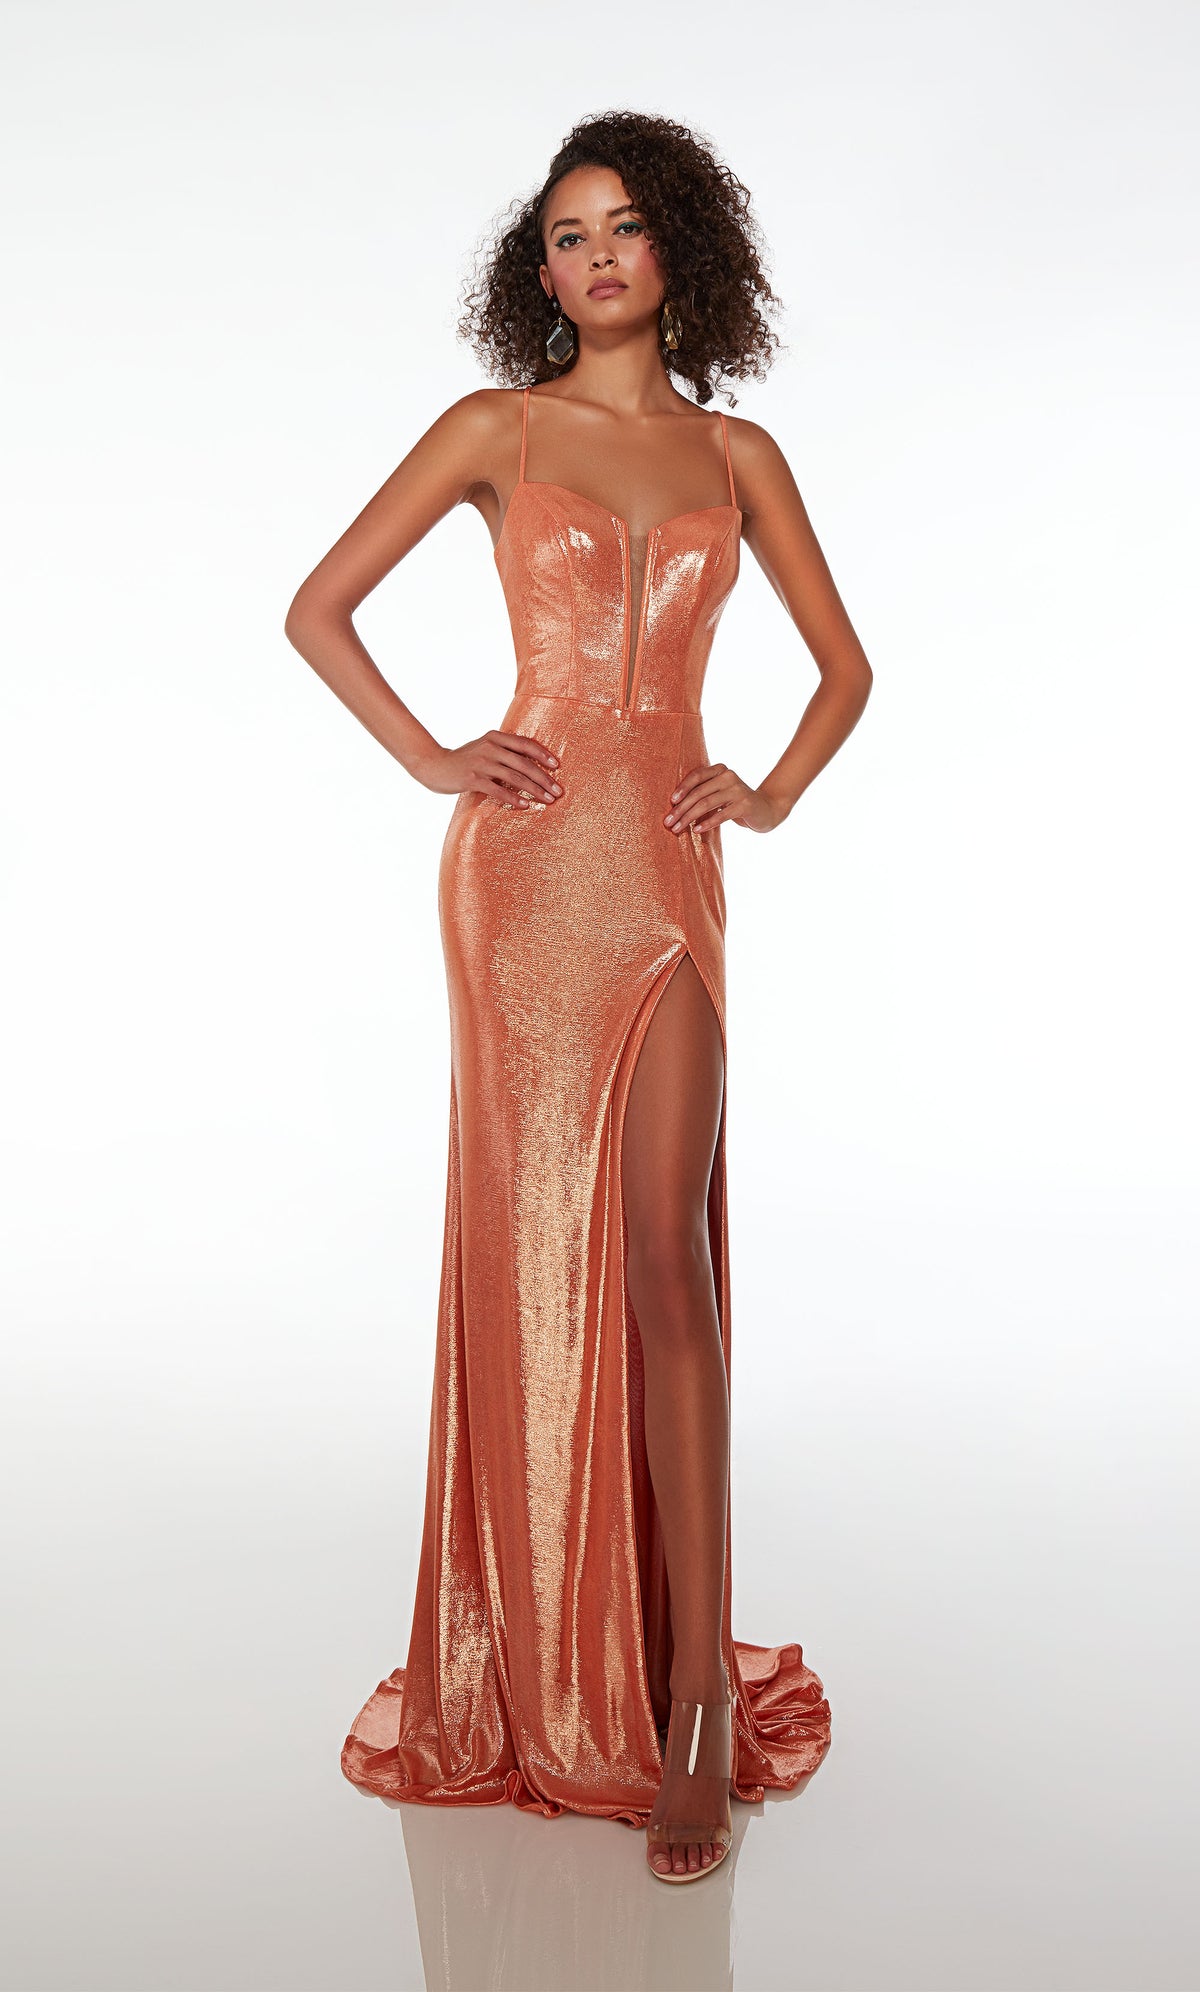 Elegant copper-colored metallic stretch formal dress with an plunging neckline, side slit, lace-up back, and an graceful train for an stylish and sophisticated look.